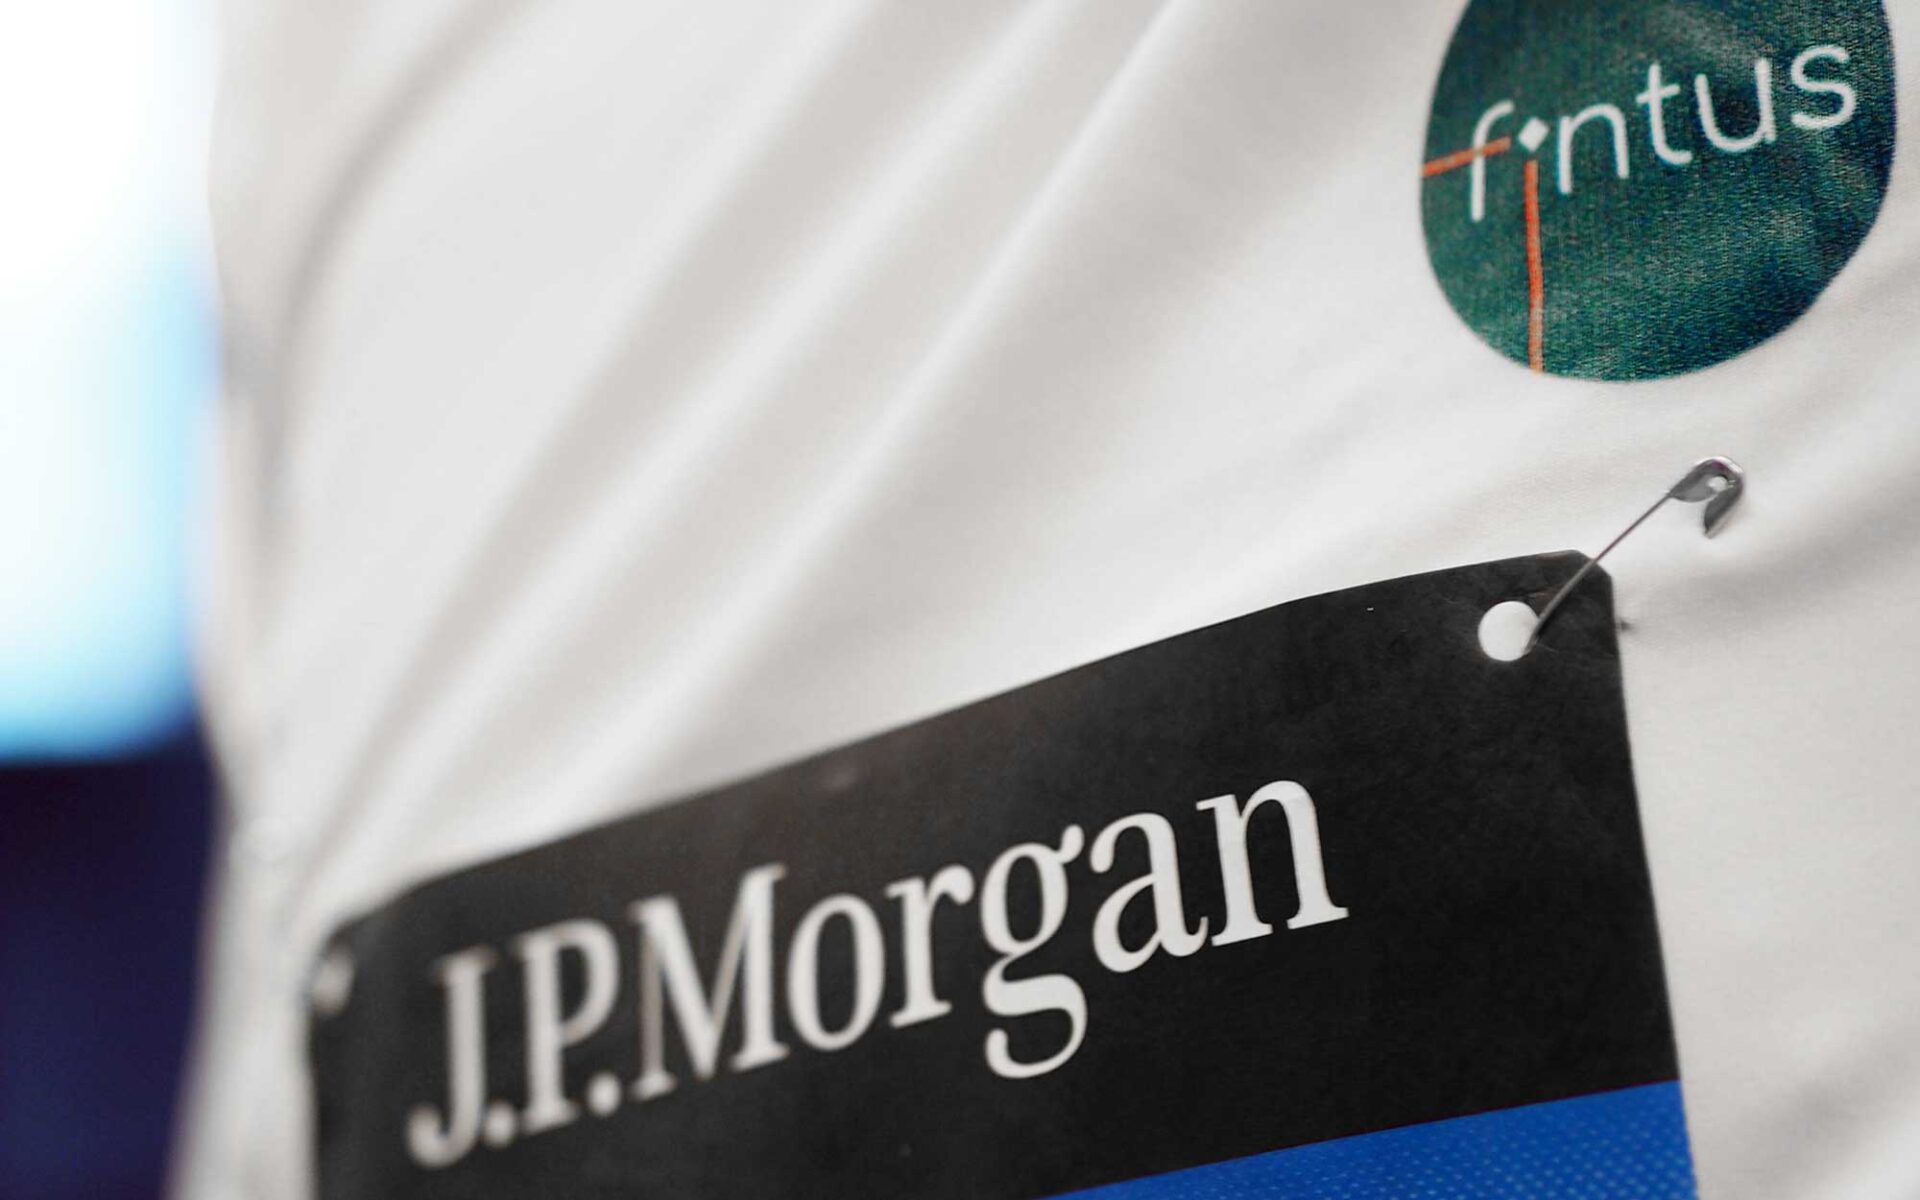 fintus is finally back at the start of the J. P. Morgan Challenge 2022